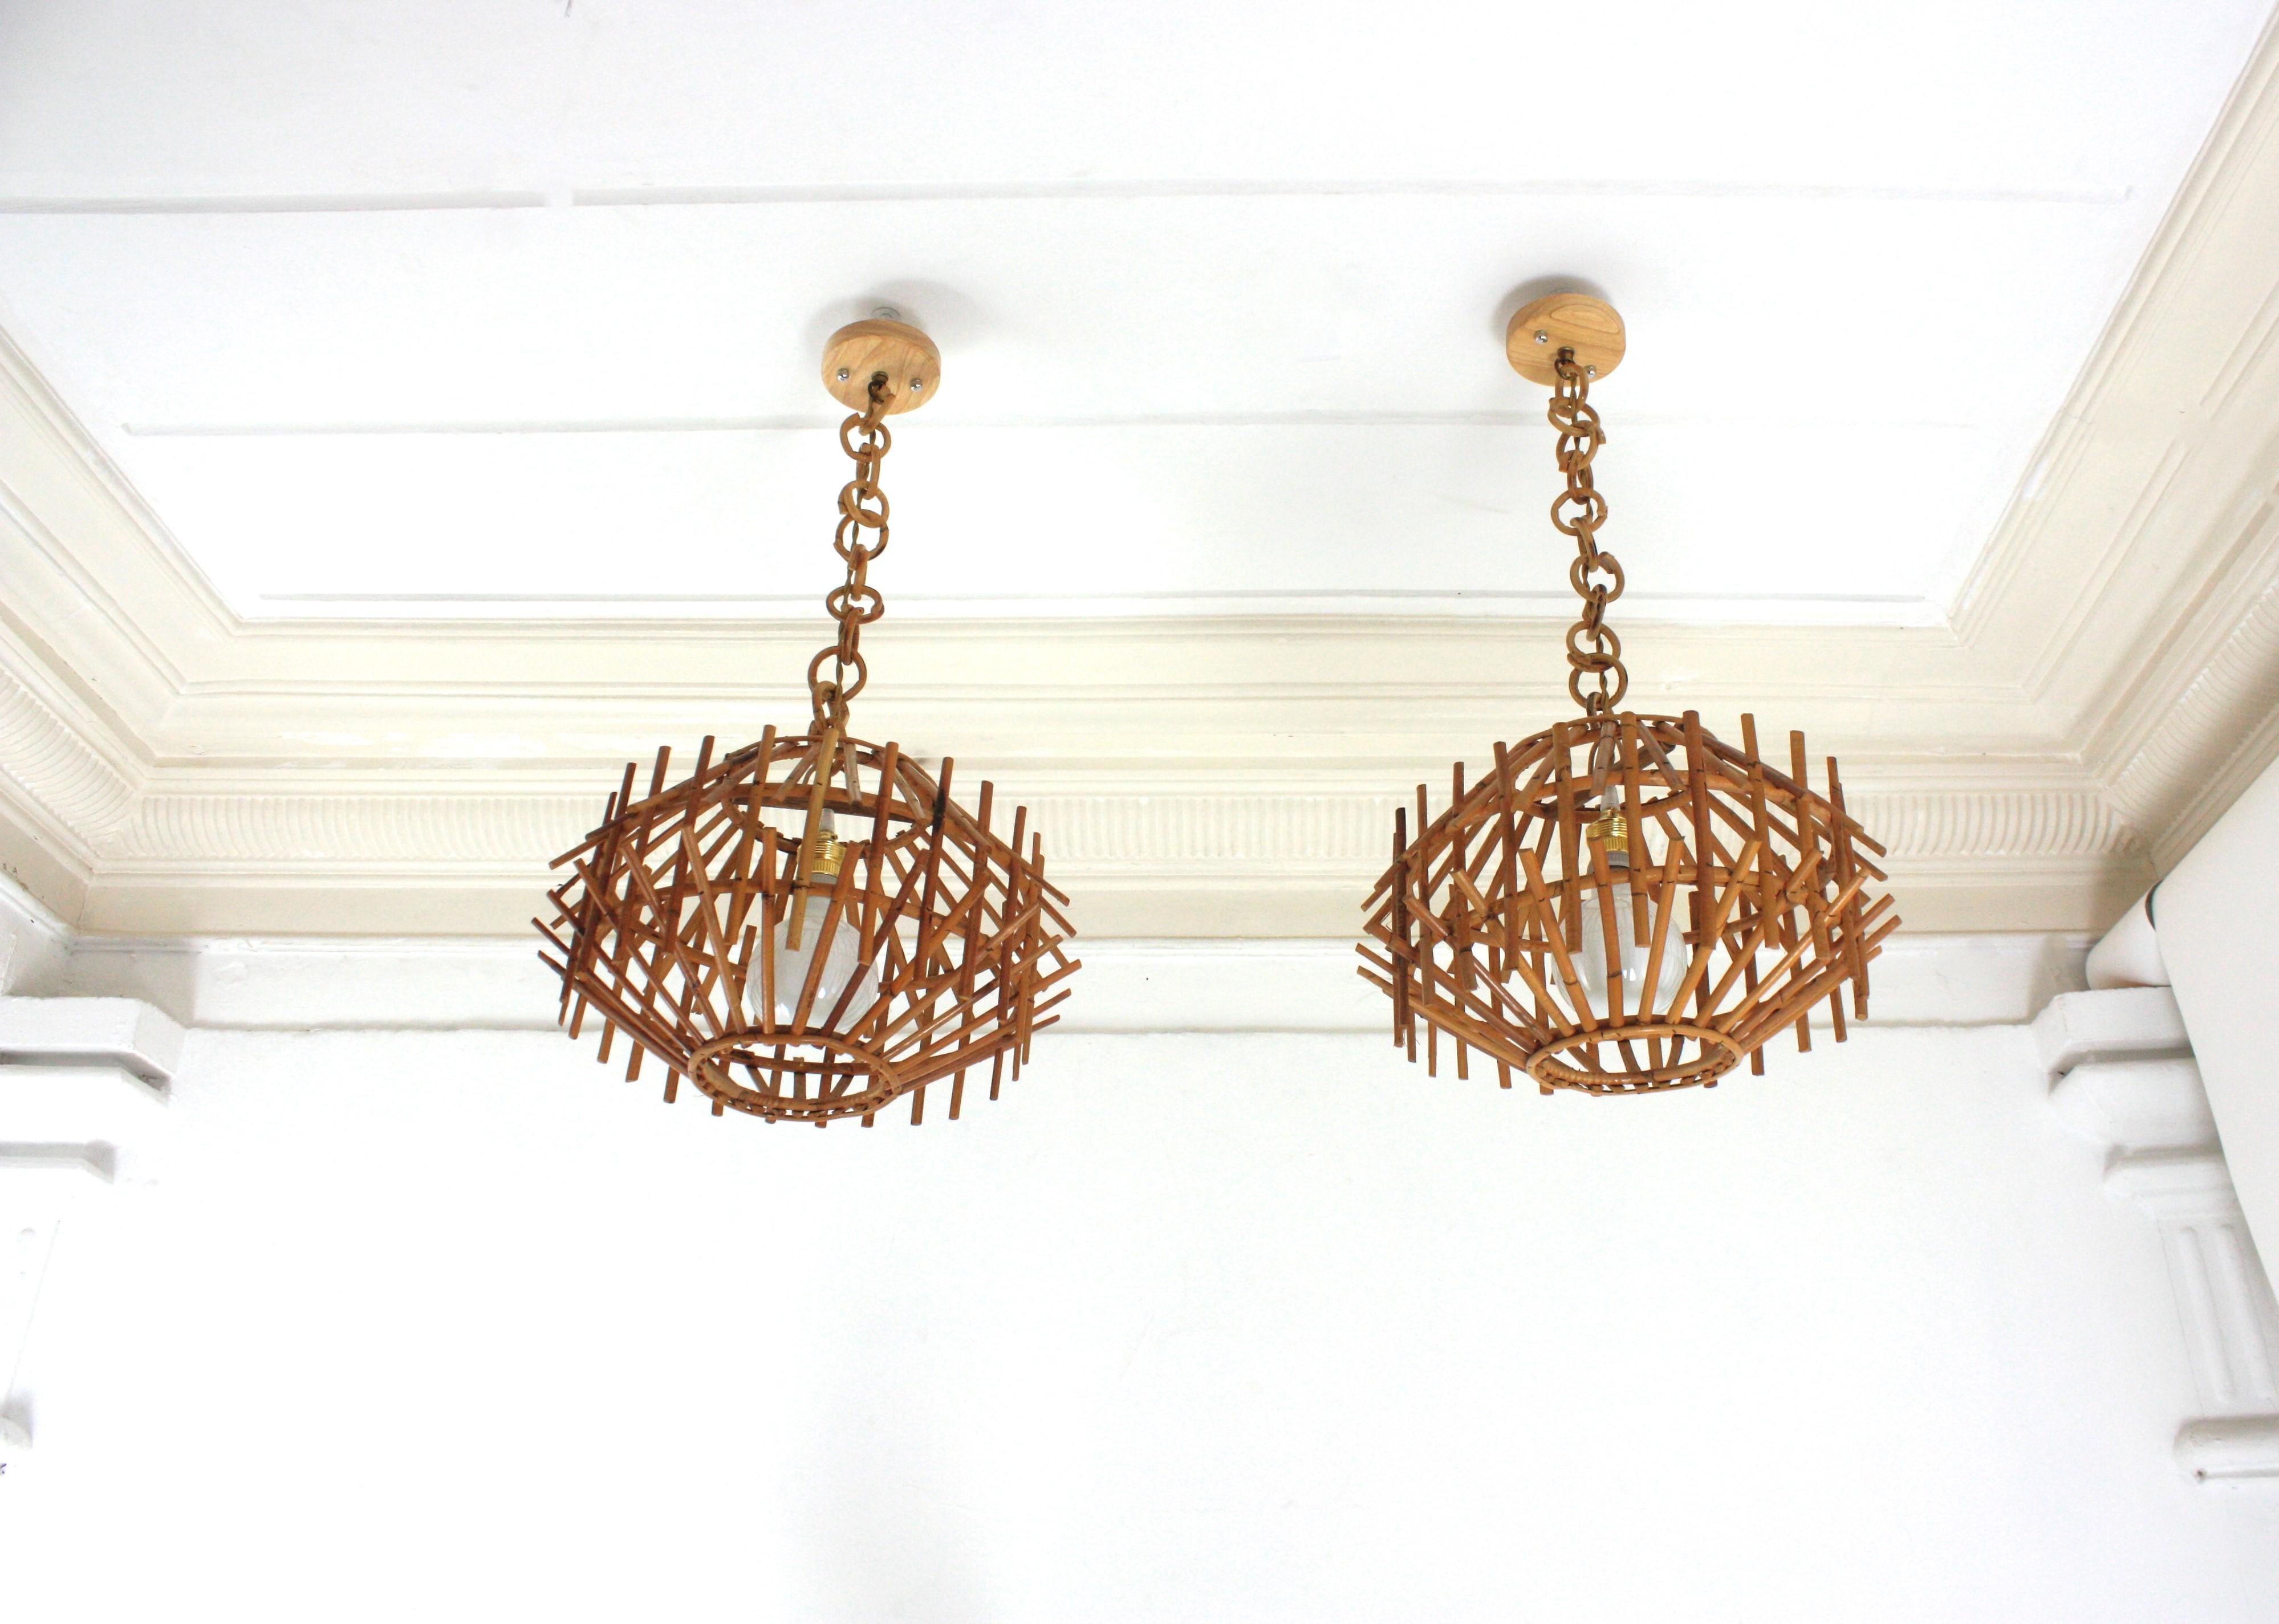 Pair of Rattan Pagoda Pendant Lights or Lanterns, 1960s For Sale 11